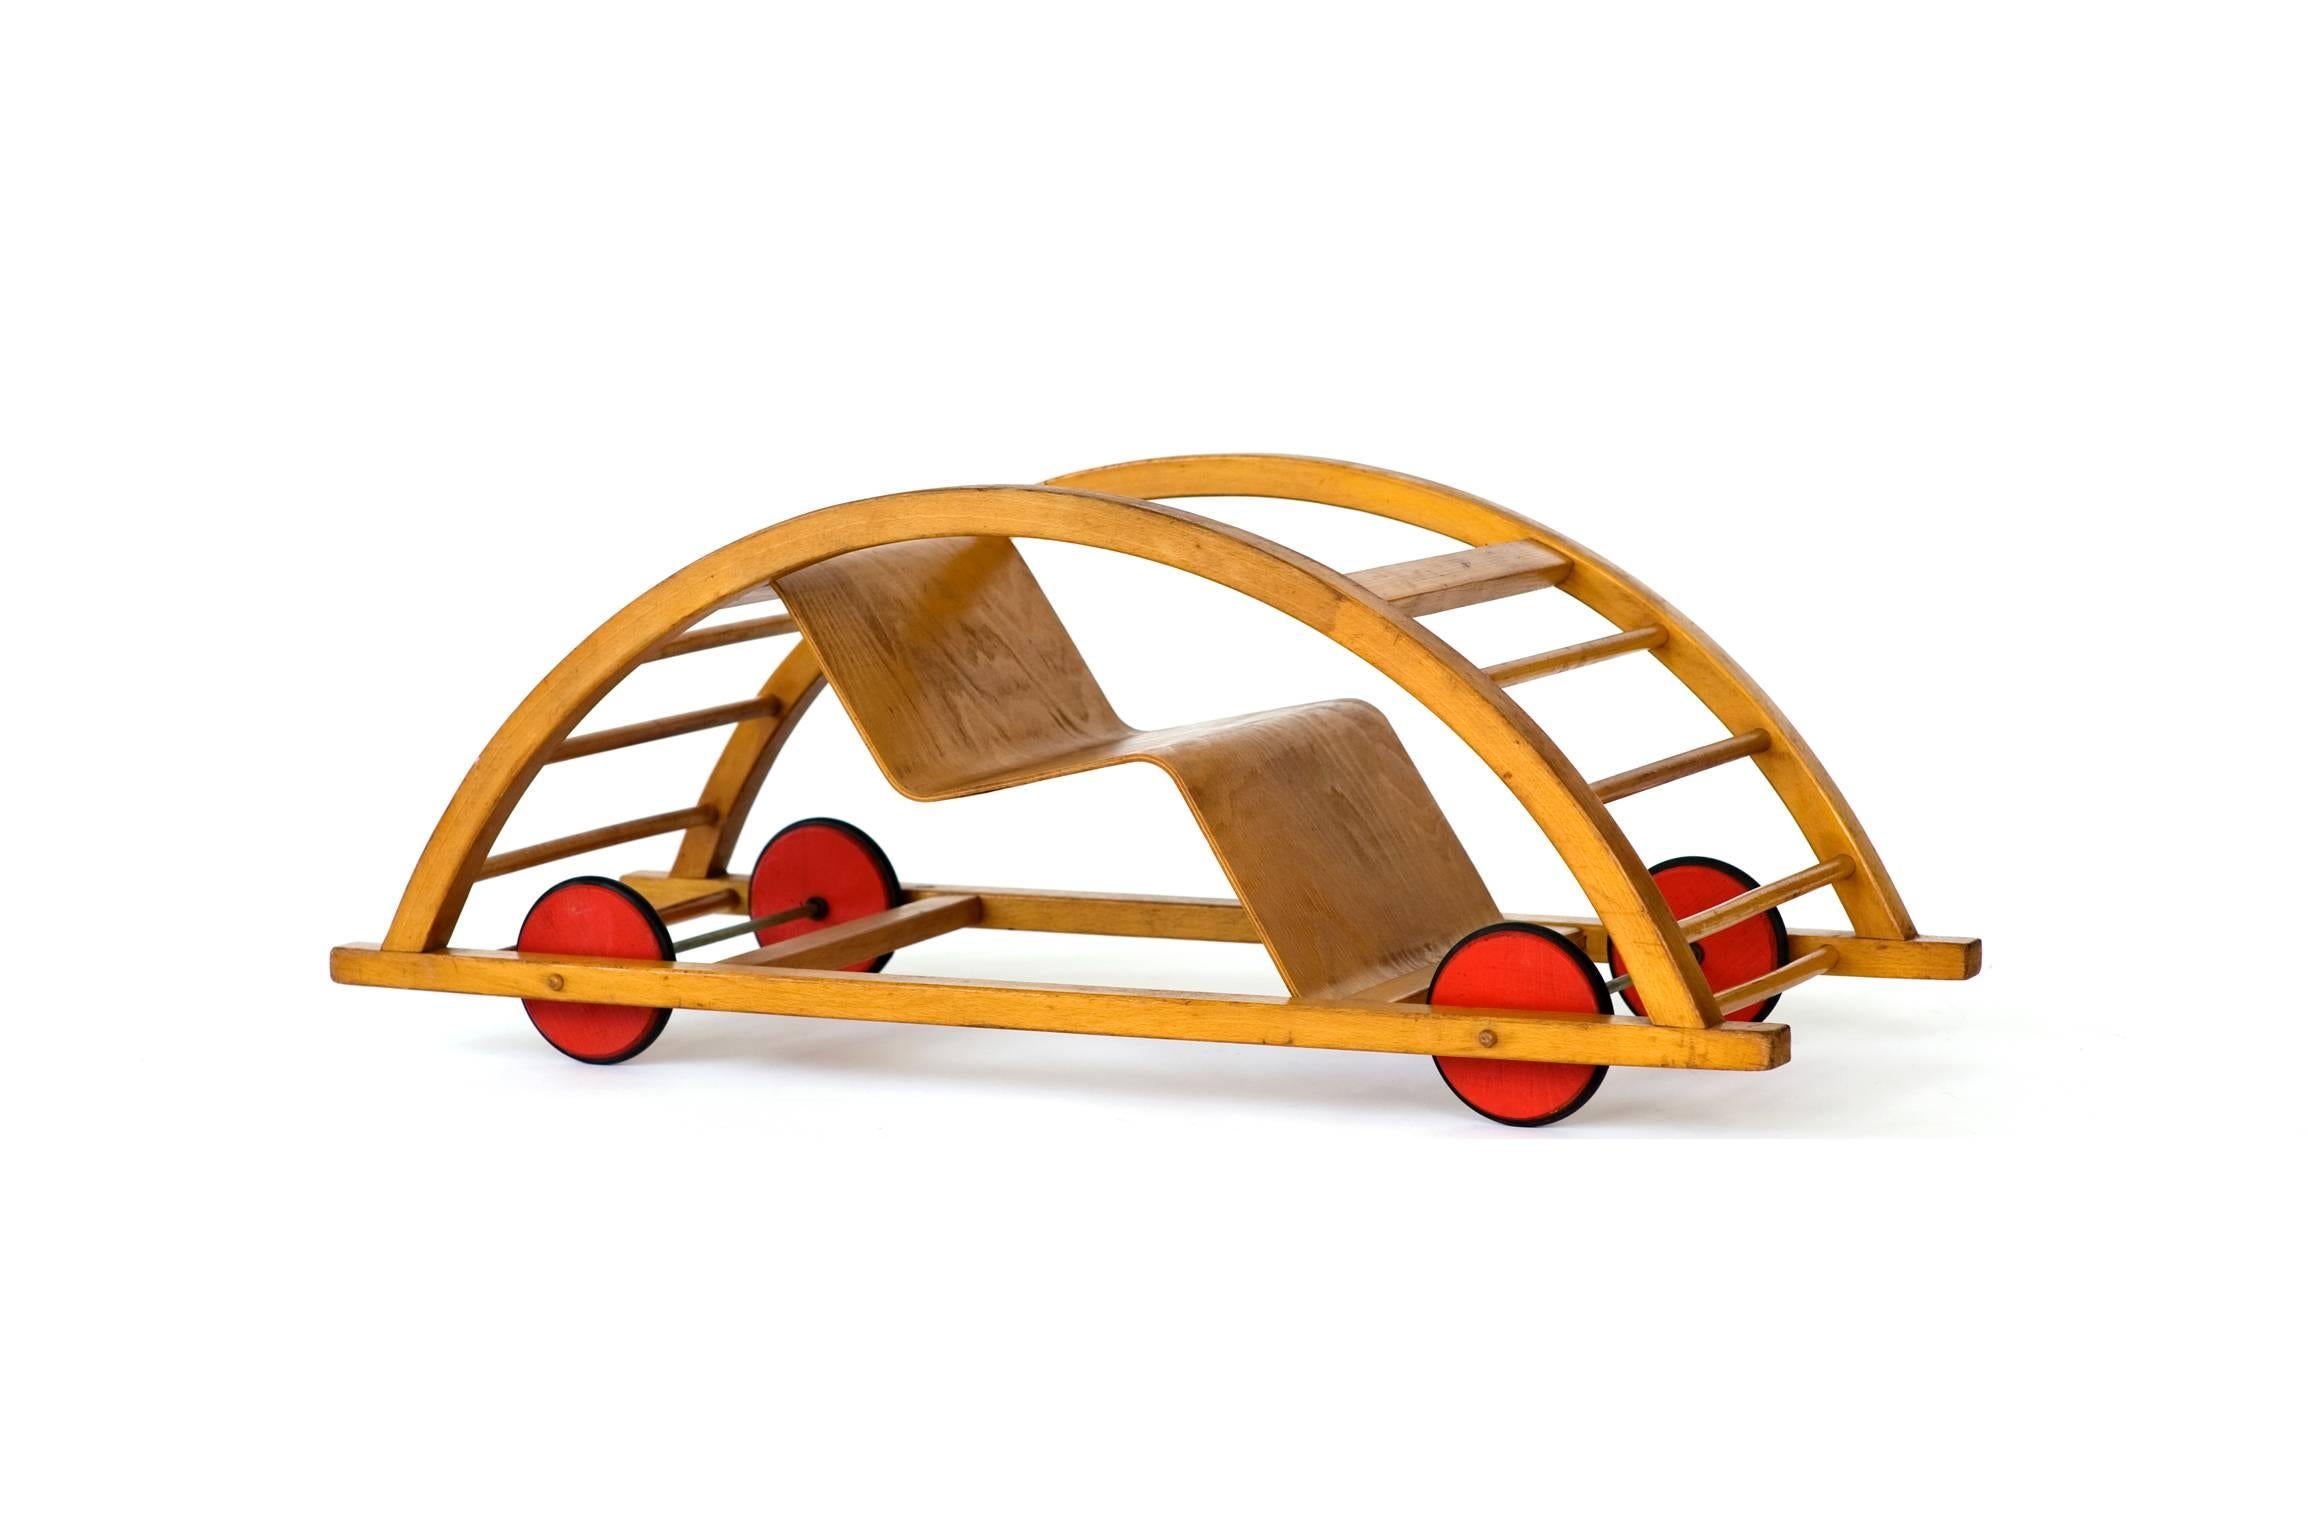 Schaukelwagon child's car or rocker by Hans Brockhage & Erwin Andra, circa 1950.

Designed by Hans Brockhage & Erwin Andra,
Germany, circa 1950.

Flips from a child's car to a rocker. 
Great for up to 6 years old depending on size of child.